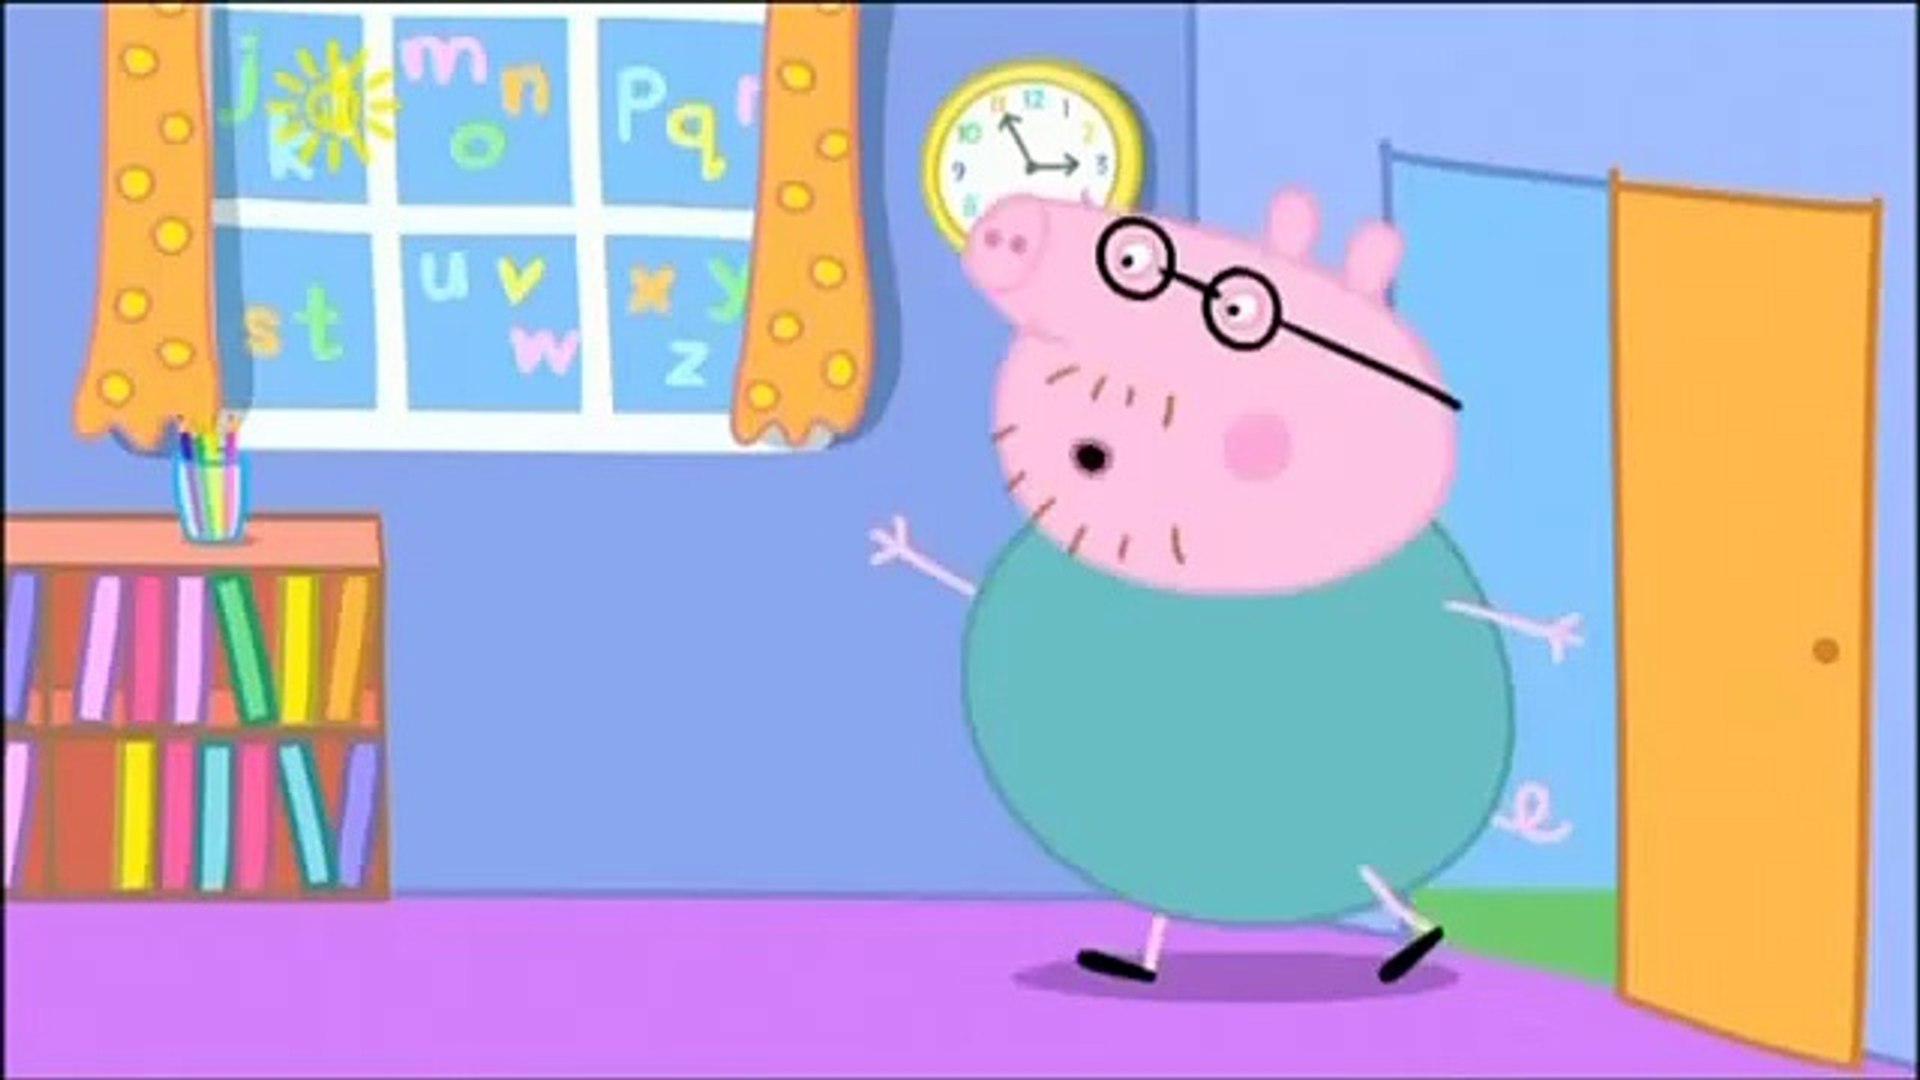 Americans might think Peppa Pig is an 'entitled brat' but I think